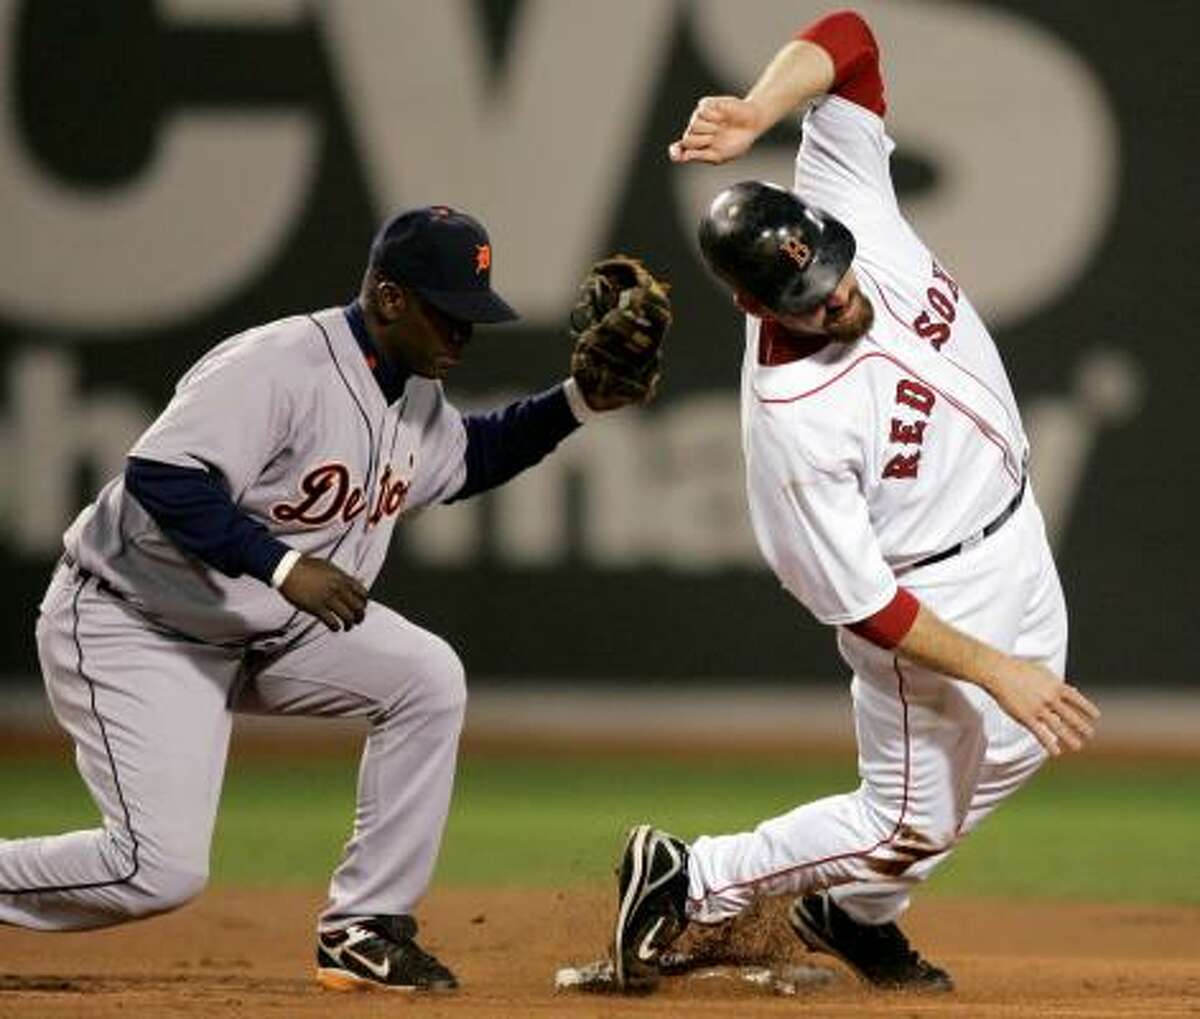 Kevin Youkilis of the Red Sox fails to elude the tag by Tigers shortstop Edgar Renteria on a steal attempt.